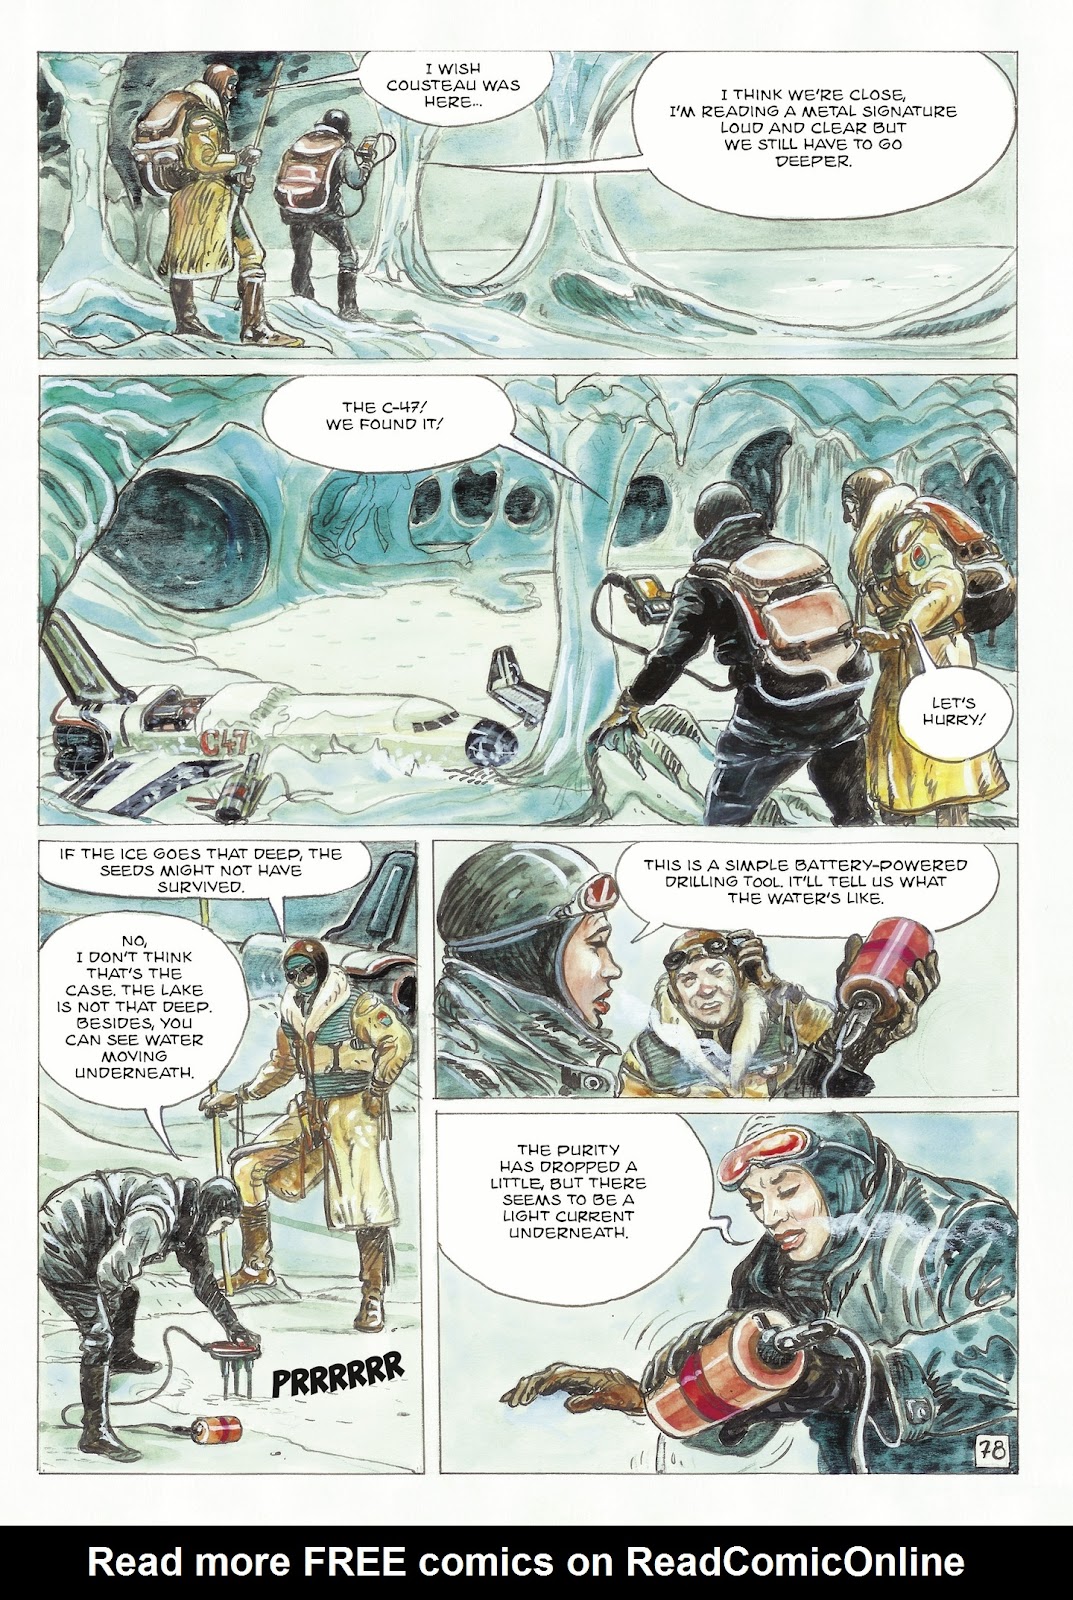 The Man With the Bear issue 2 - Page 24